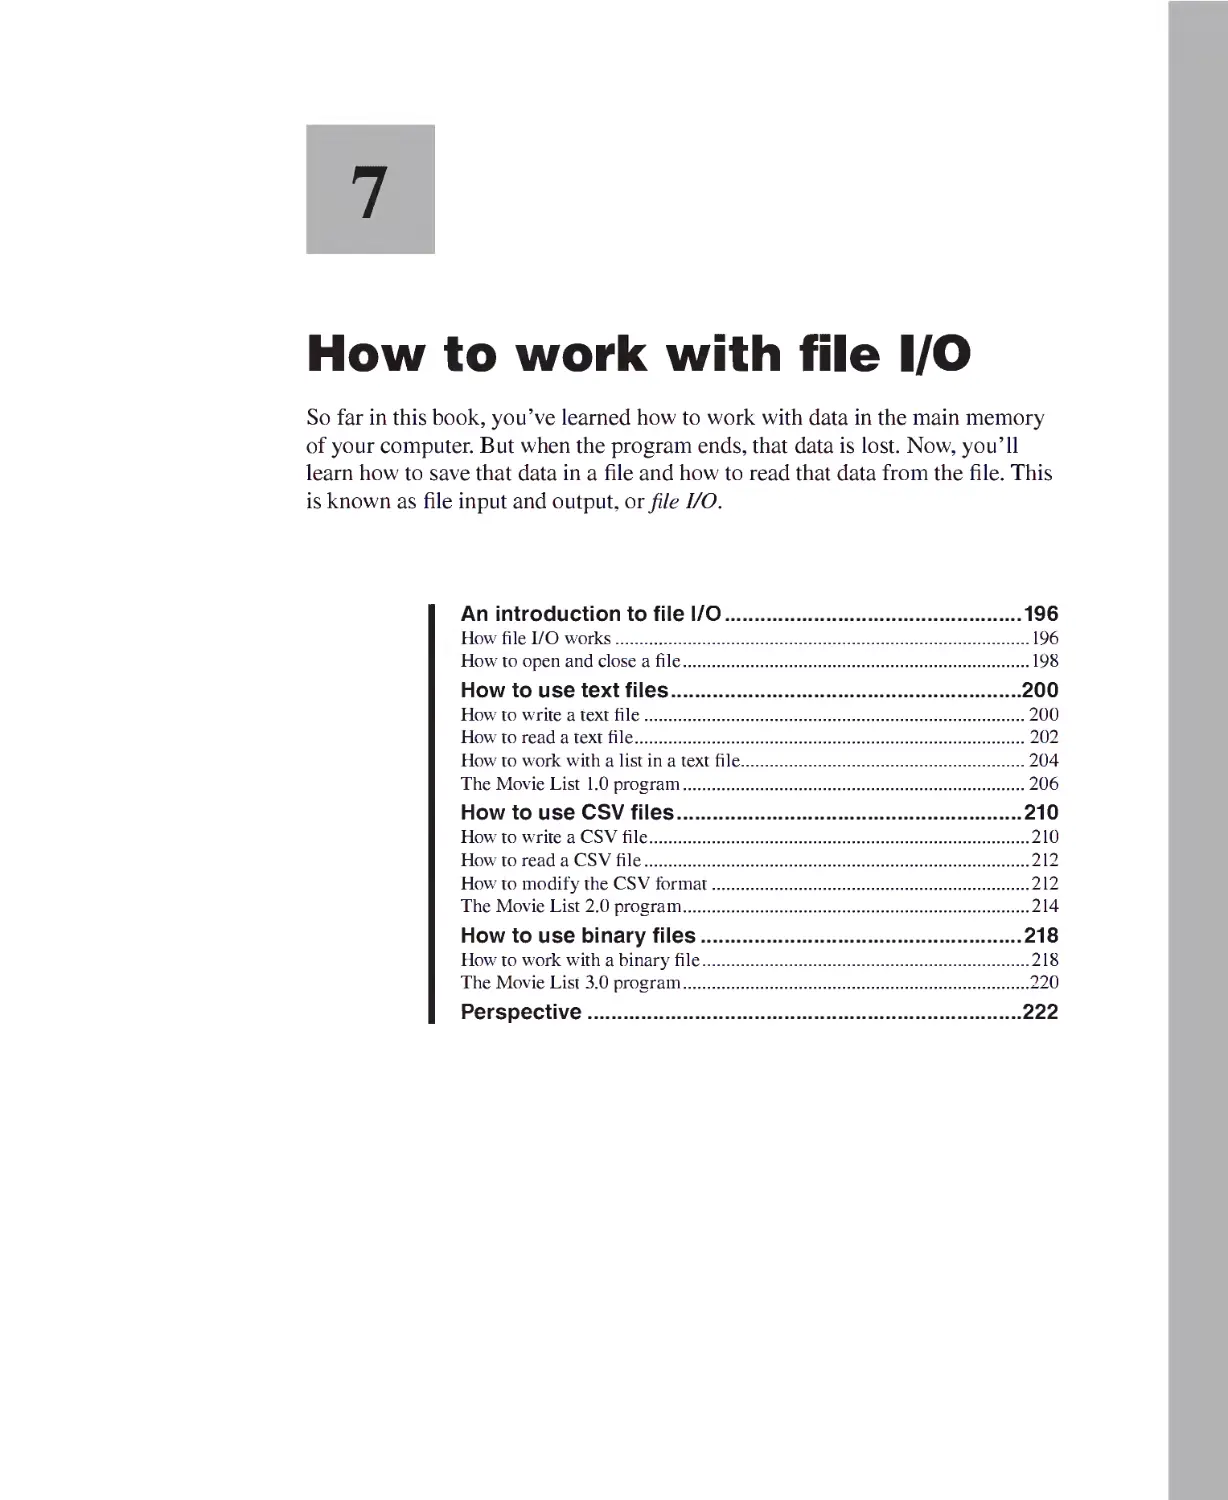 Chapter 7 - How to Work with File I/O